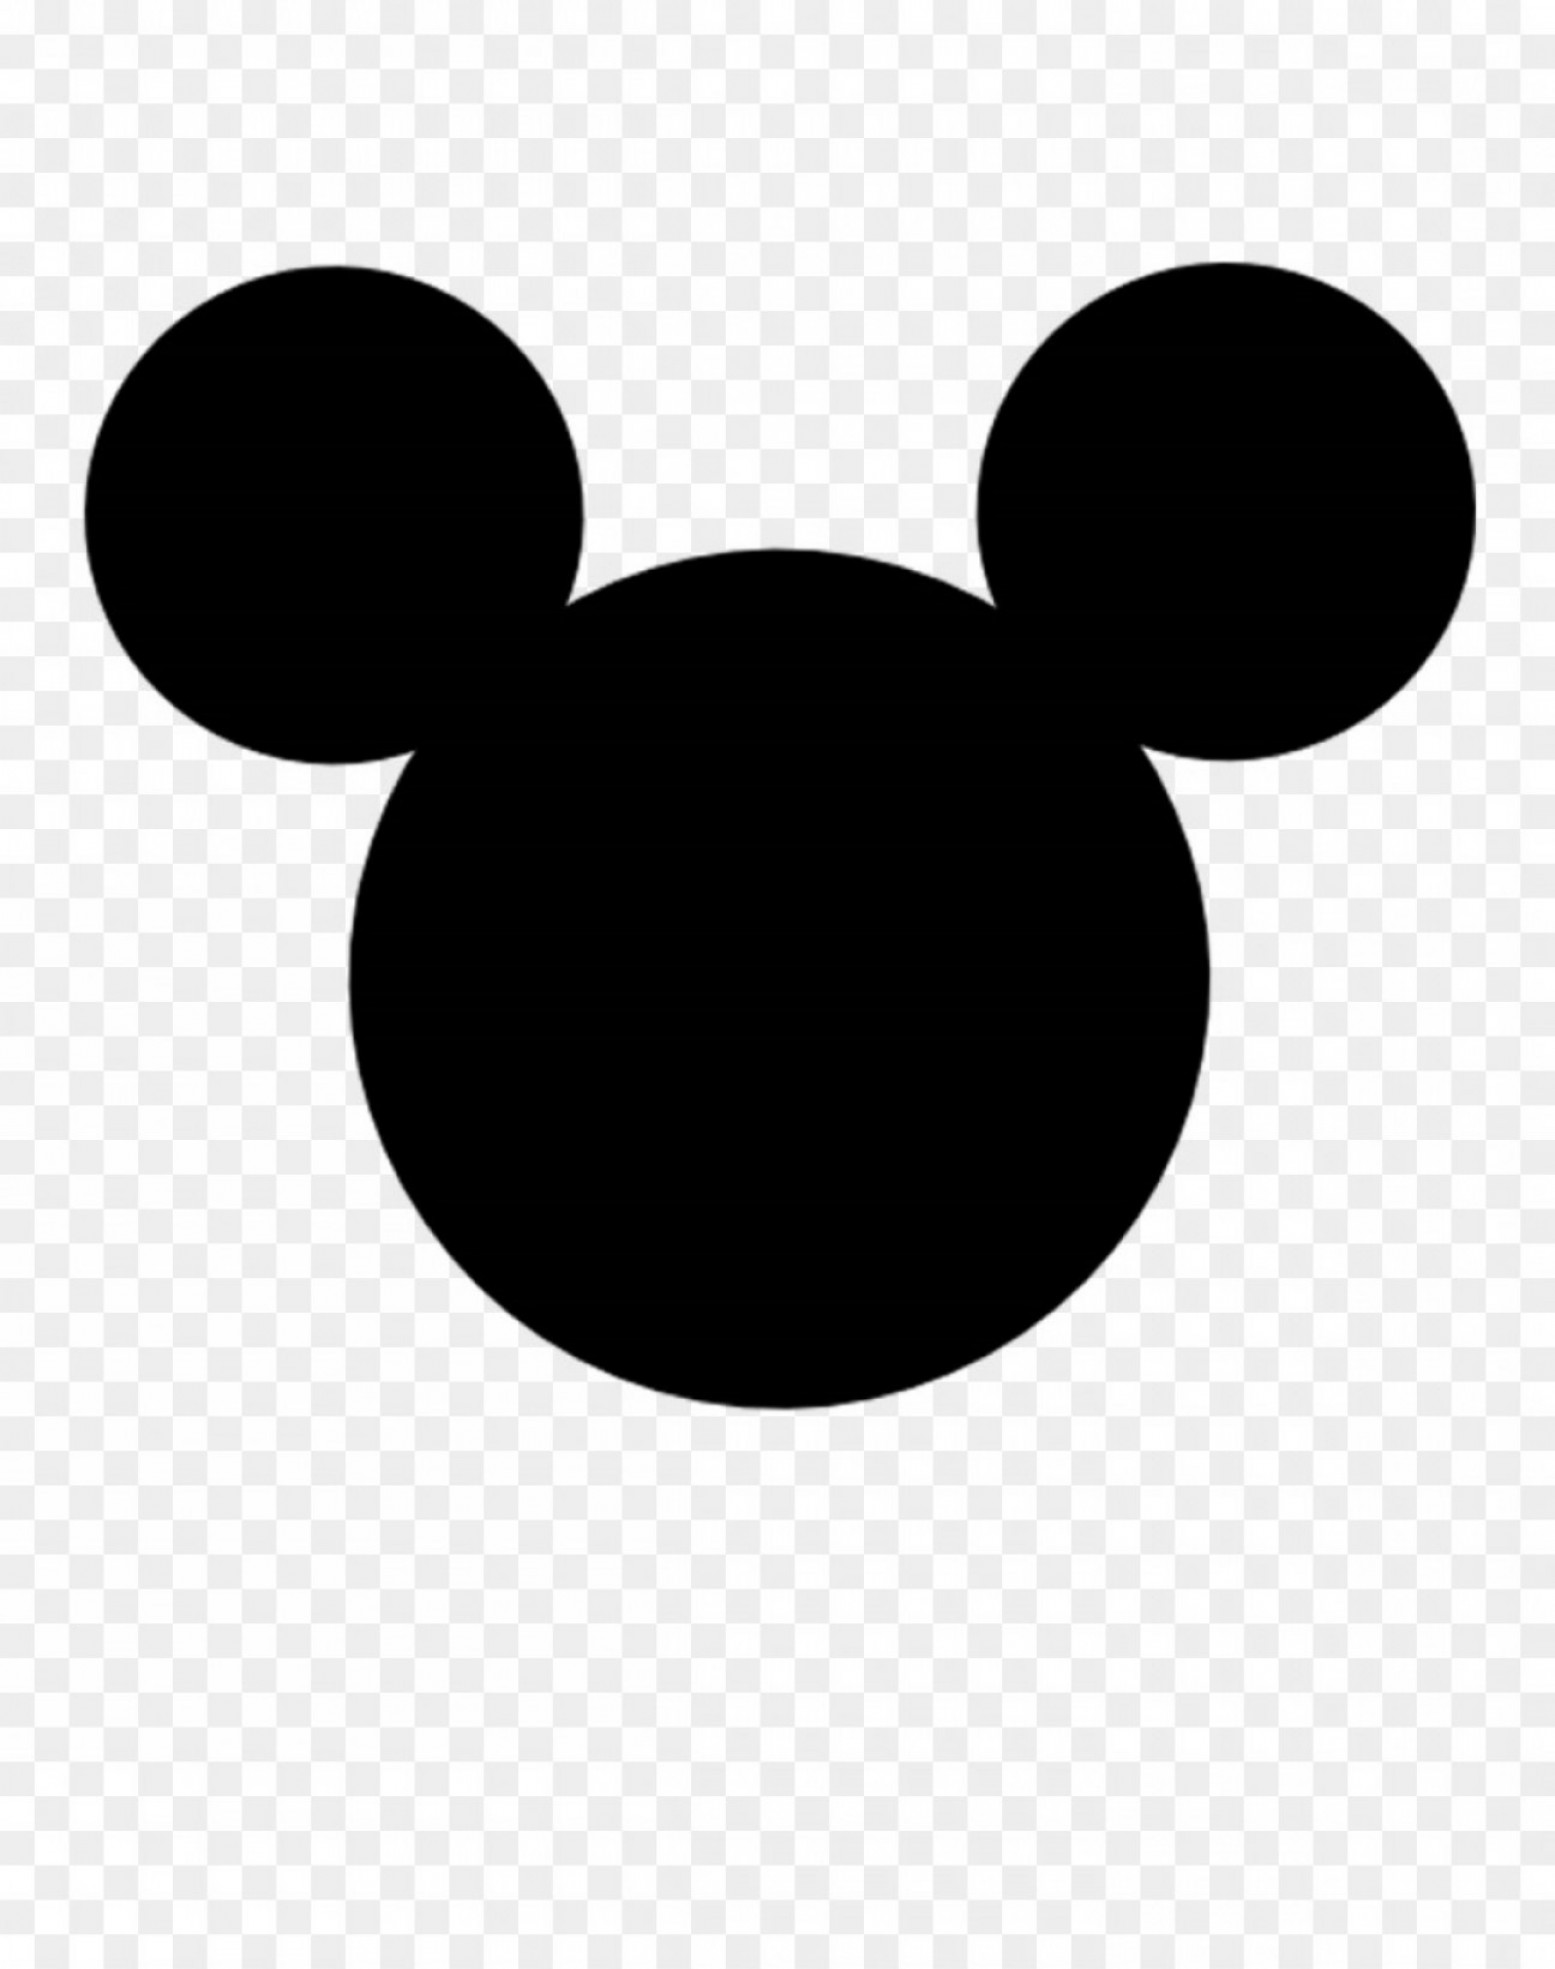 Mickey Mouse Logo Png & Free Mickey Mouse Logo.png Transparent Pluspng.com  - Mickey Mouse, Transparent background PNG HD thumbnail